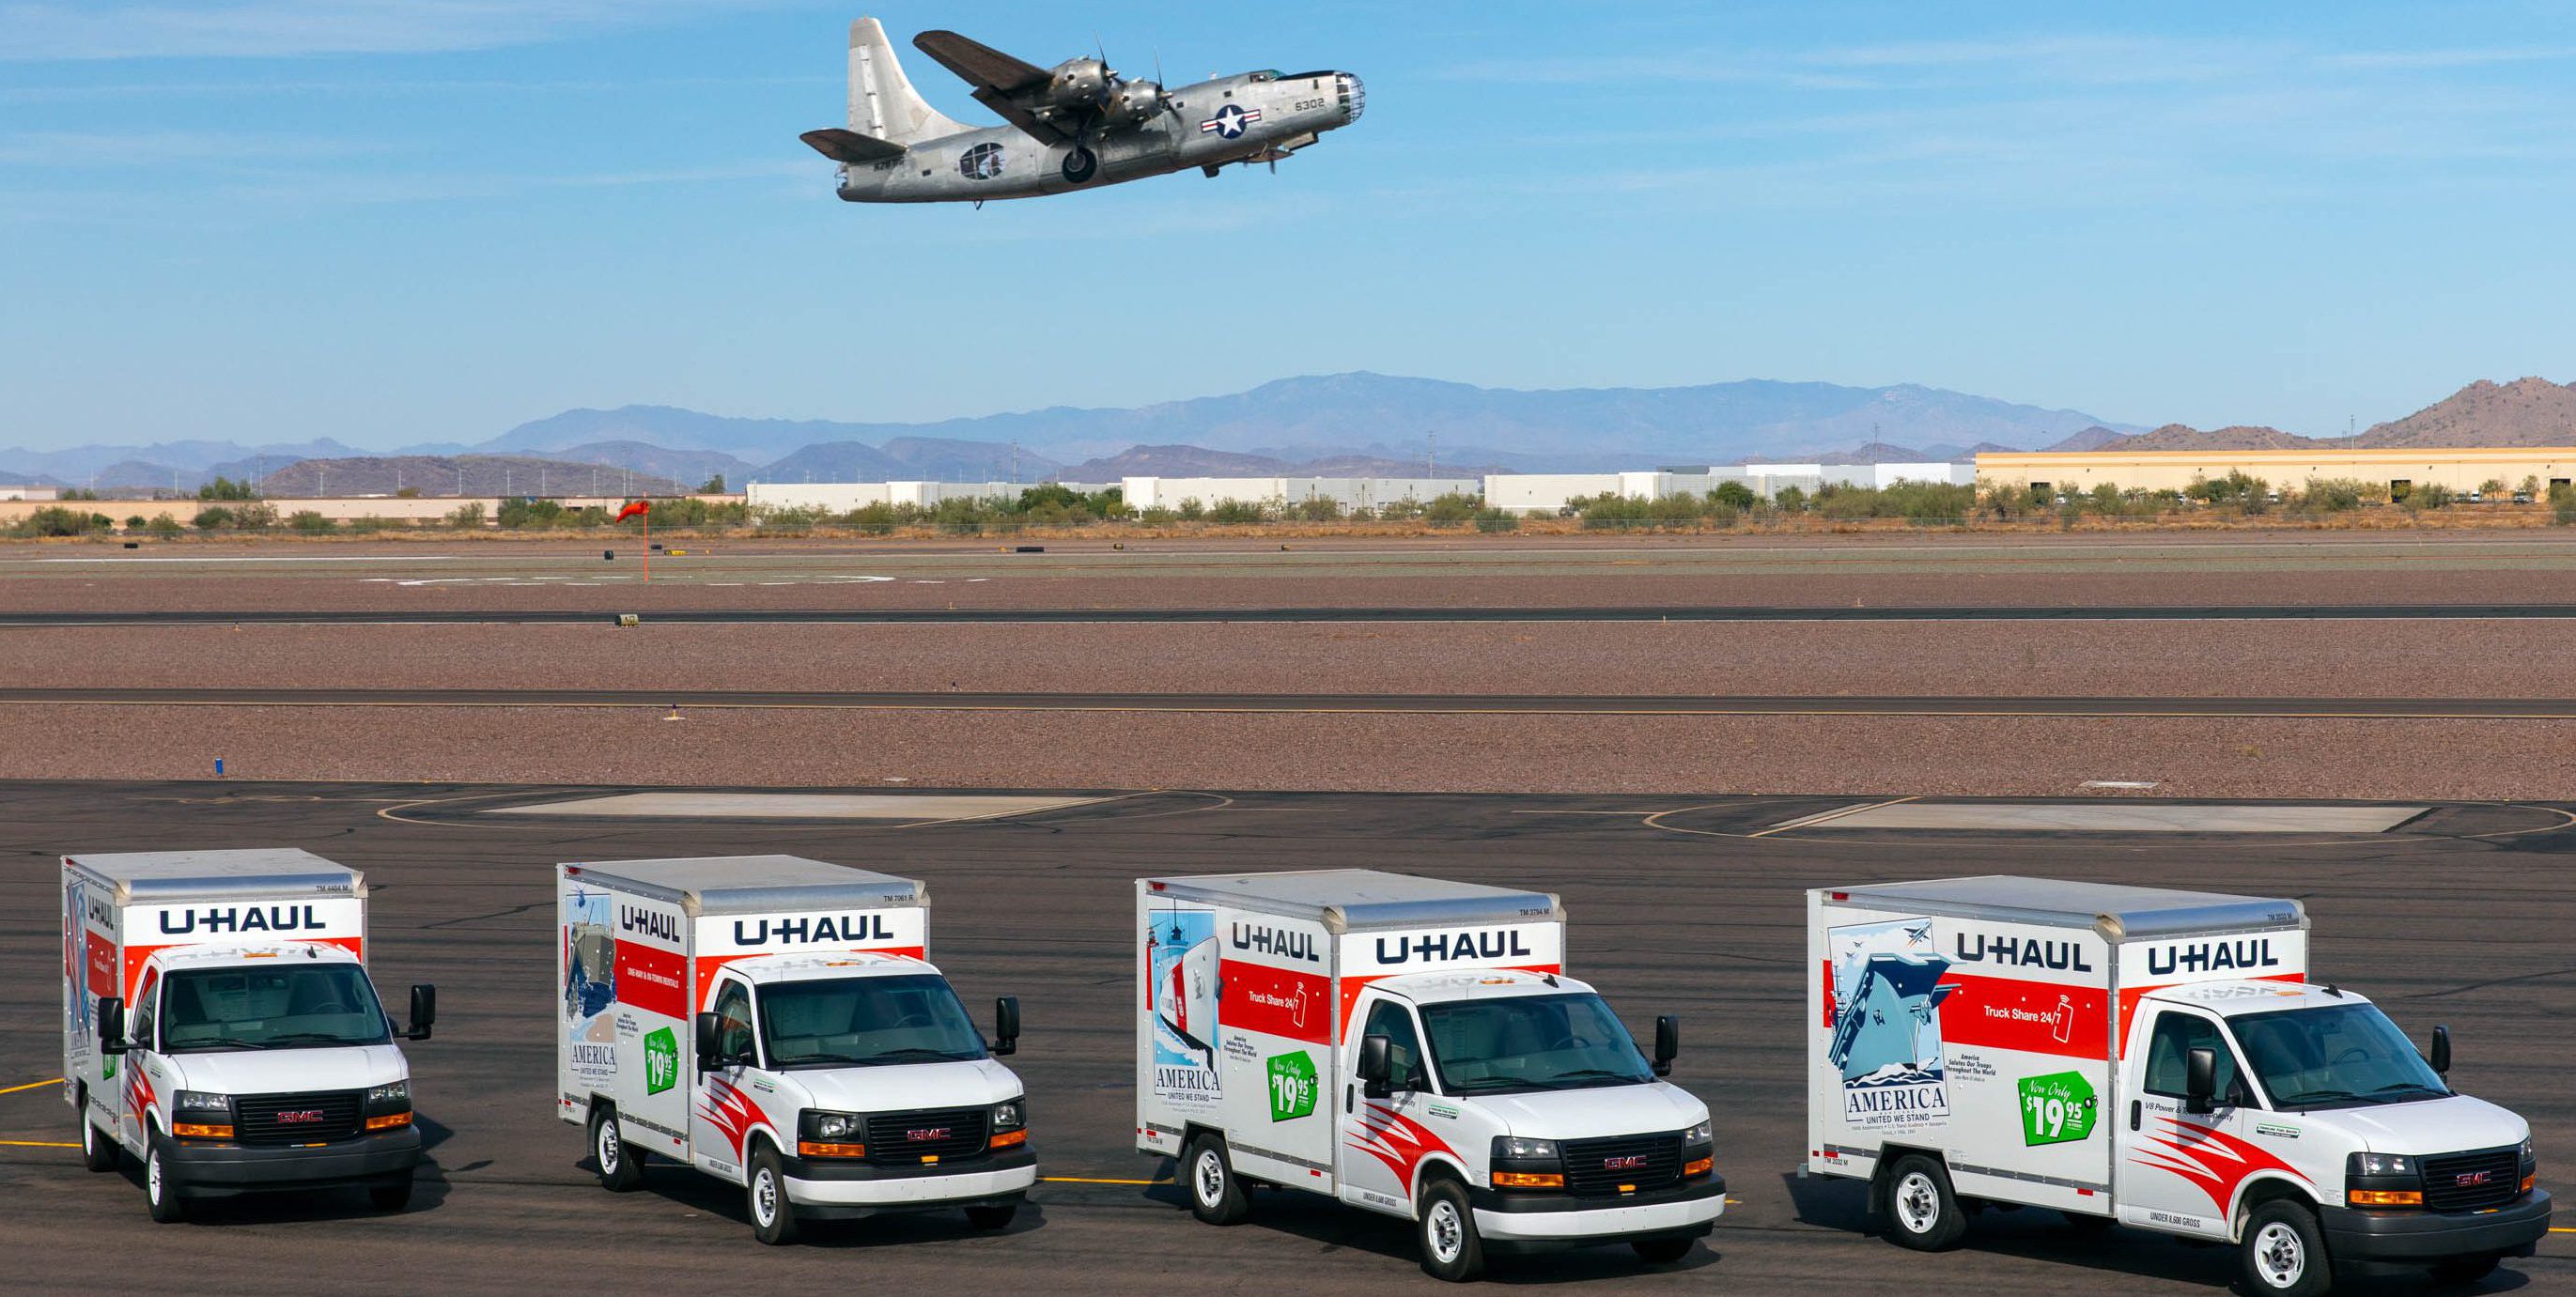 PB4Y-2 Privateer, a WWII Bomber, at the Veterans Day Remembrance Breakfast hosted by U-Haul and Phoenix Sister Cities